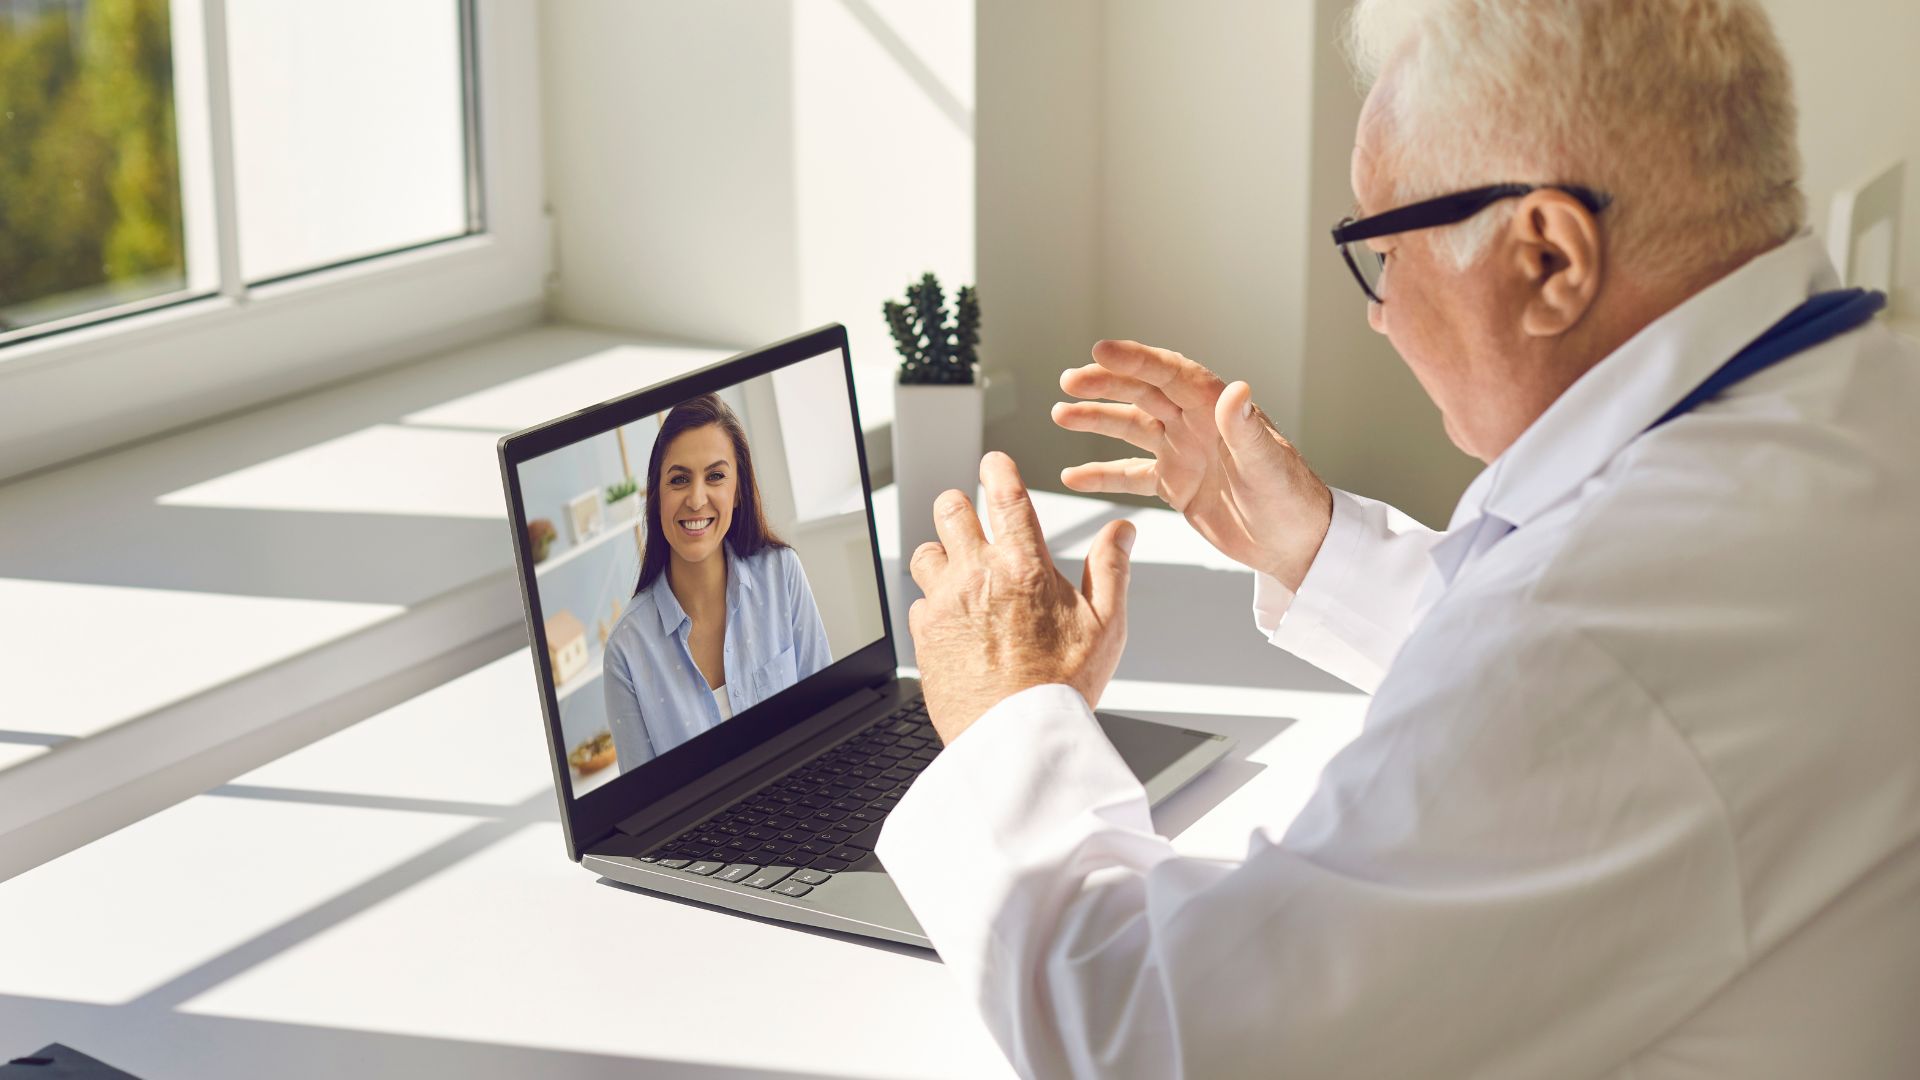 Telehealth vs. Remote Patient Monitoring: Which Option is Better for Your Patients?